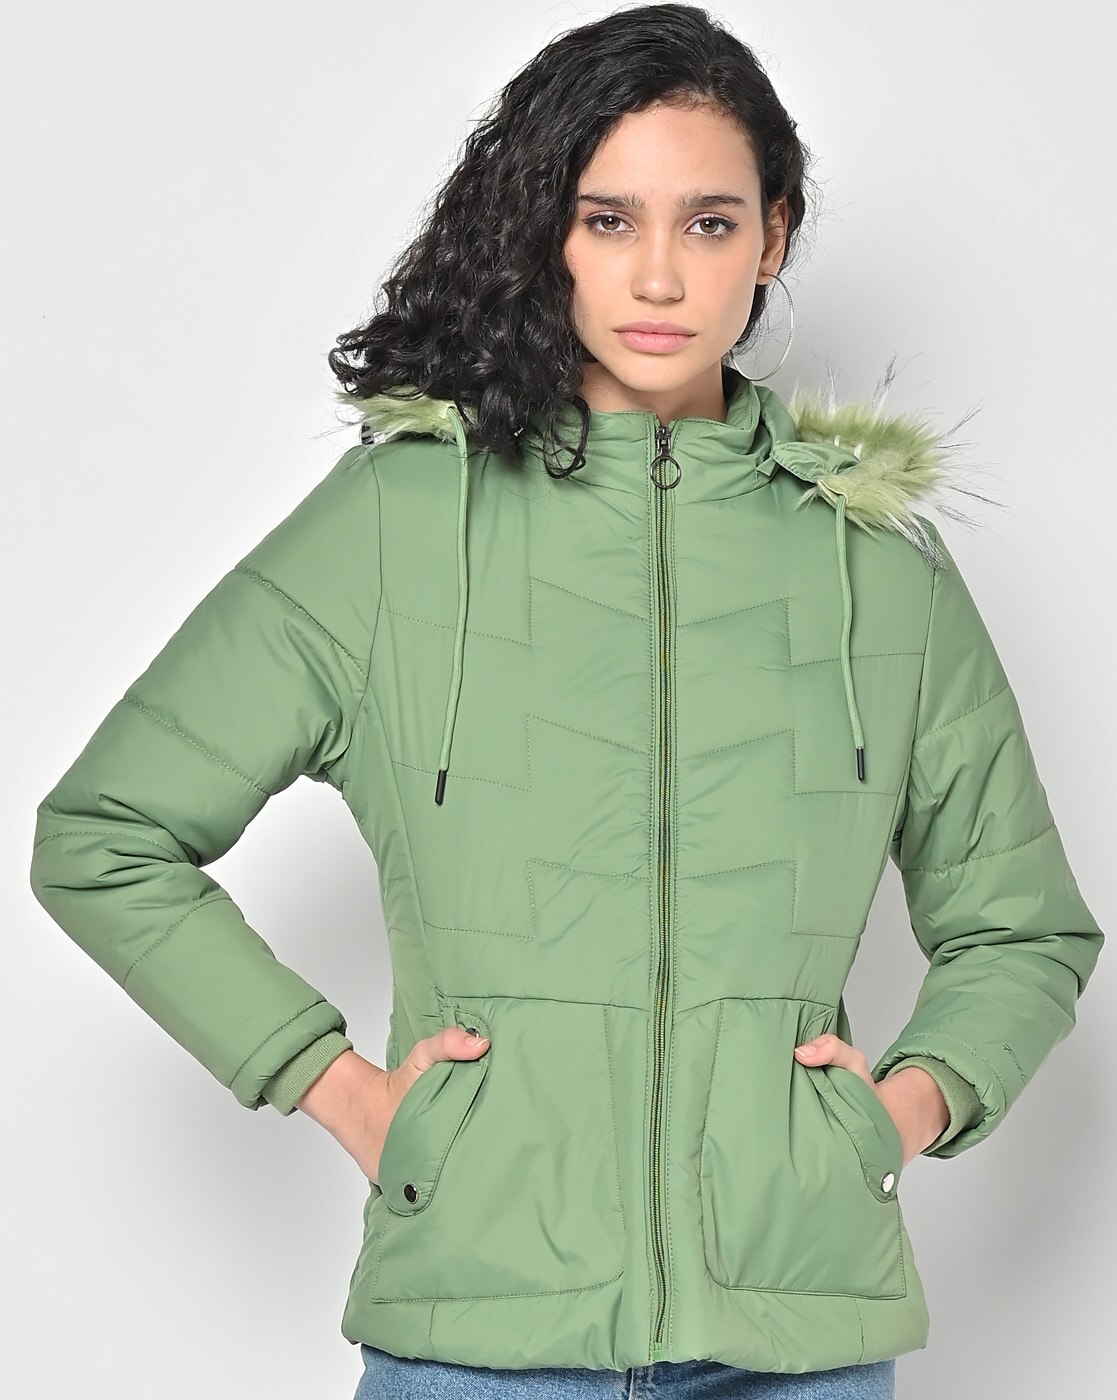 Fort Collins Jackets & Coats for Women sale - discounted price | FASHIOLA  INDIA